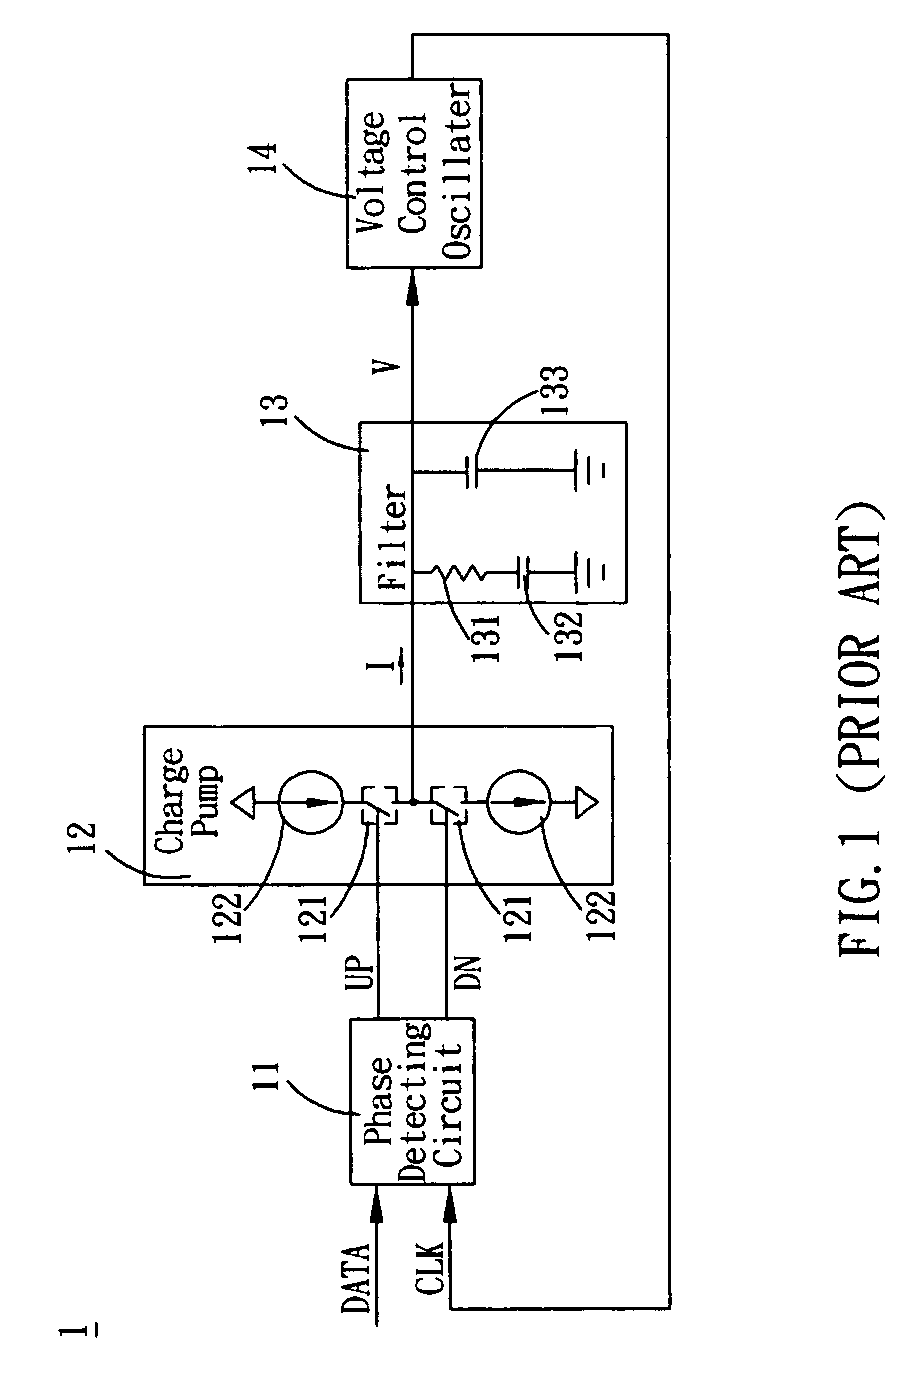 Clock and data recovery circuit and method thereof